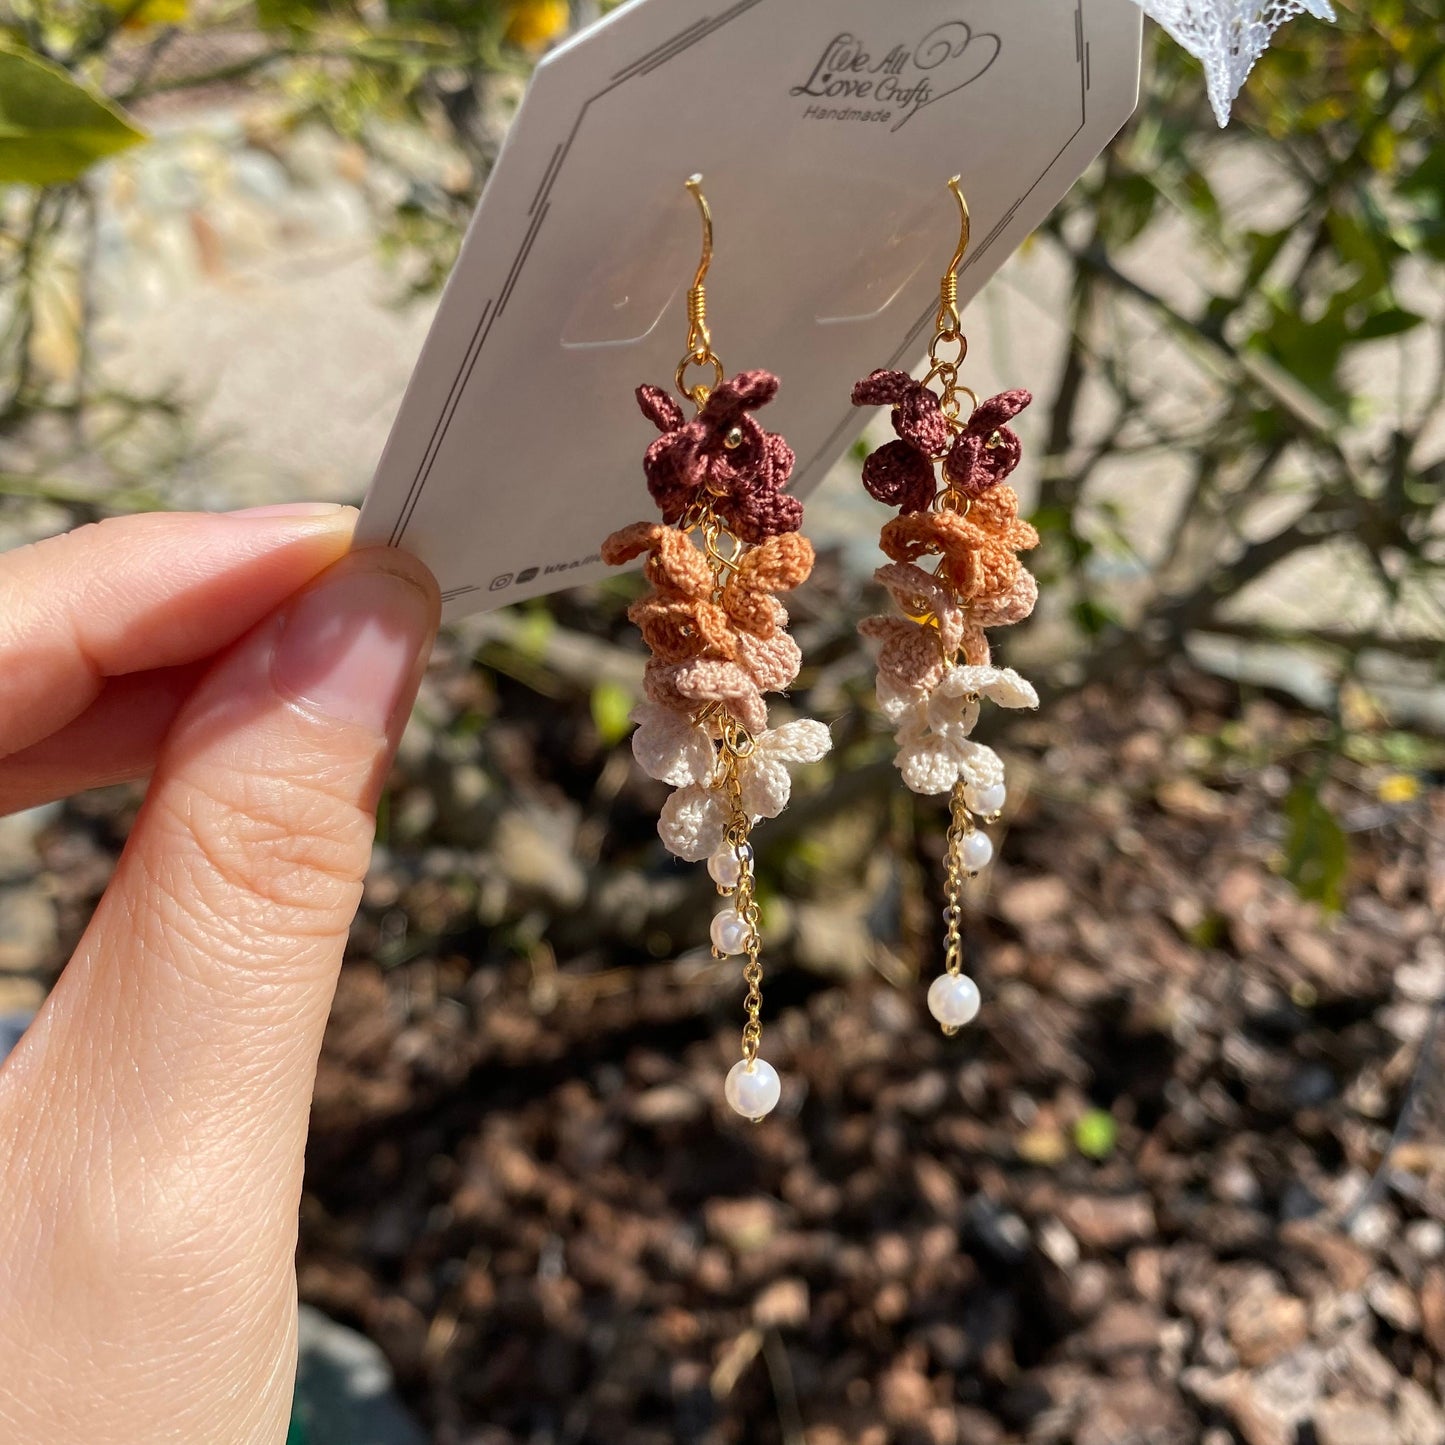 Load image into Gallery viewer, 4 shades of Brown and Beige ombre flower cluster crochet dangle earrings/Microcrochet/14k gold/gift for her/Knitting handmade jewelry
